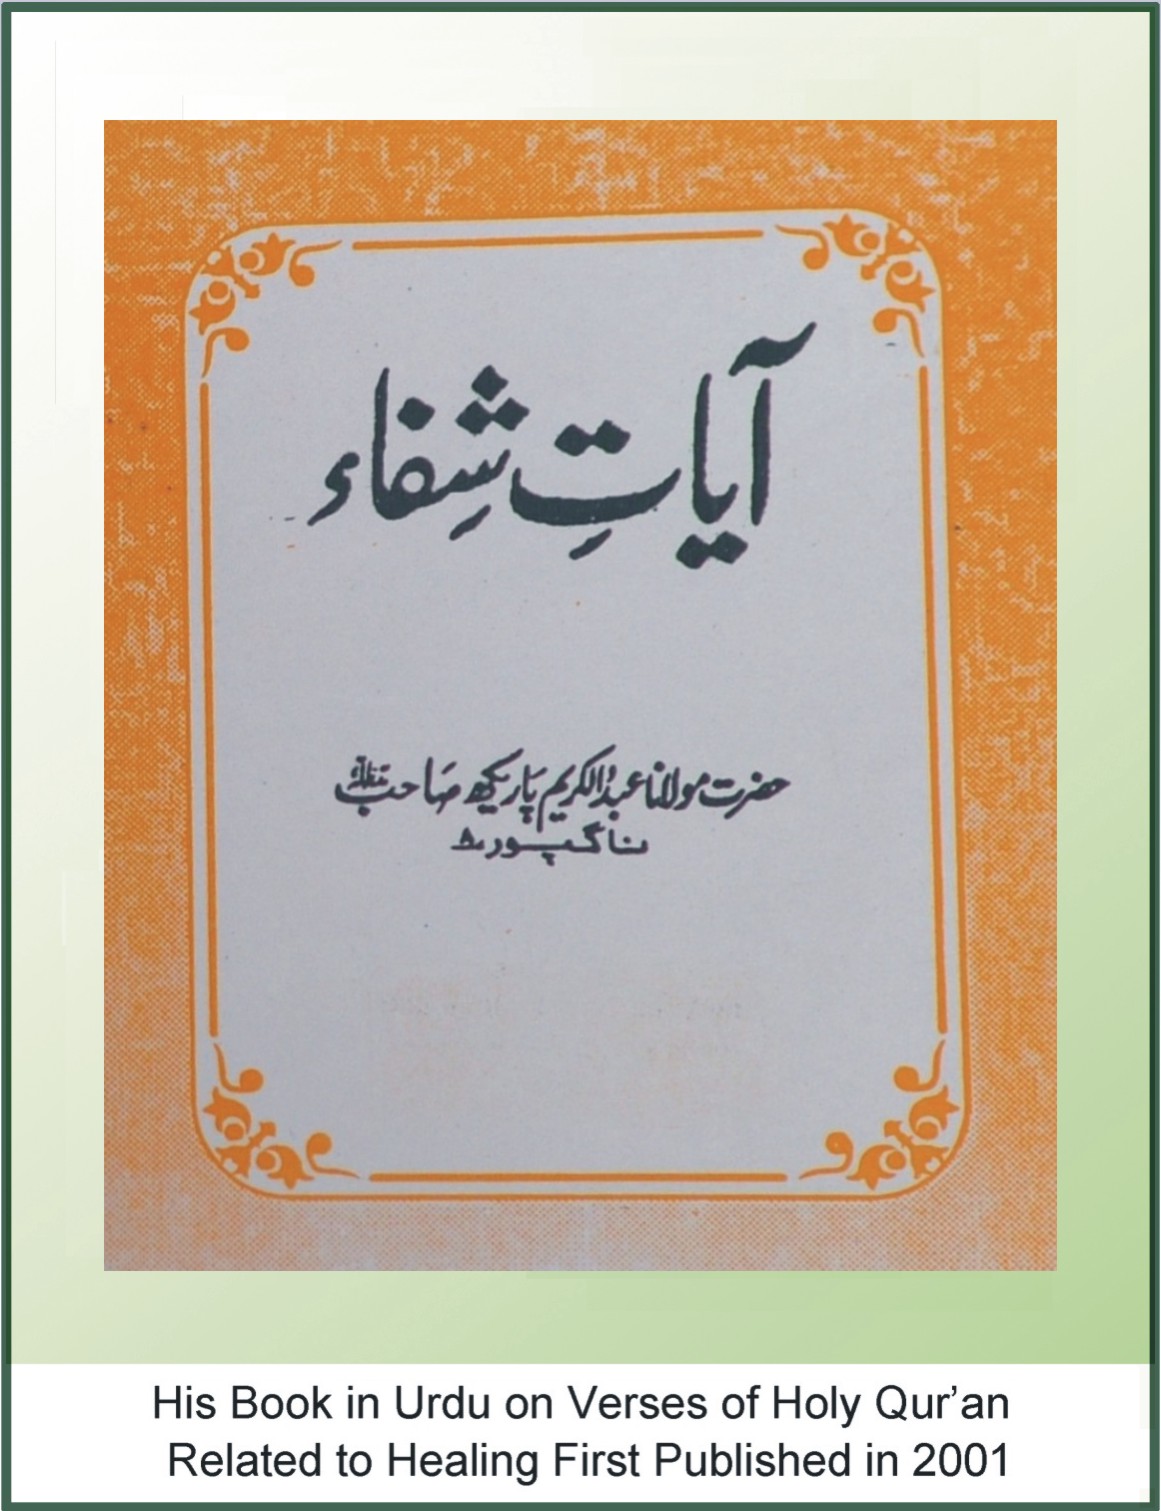 Verses of The Holy Qur'an Related to Healing (Urdu) First Published in 2001